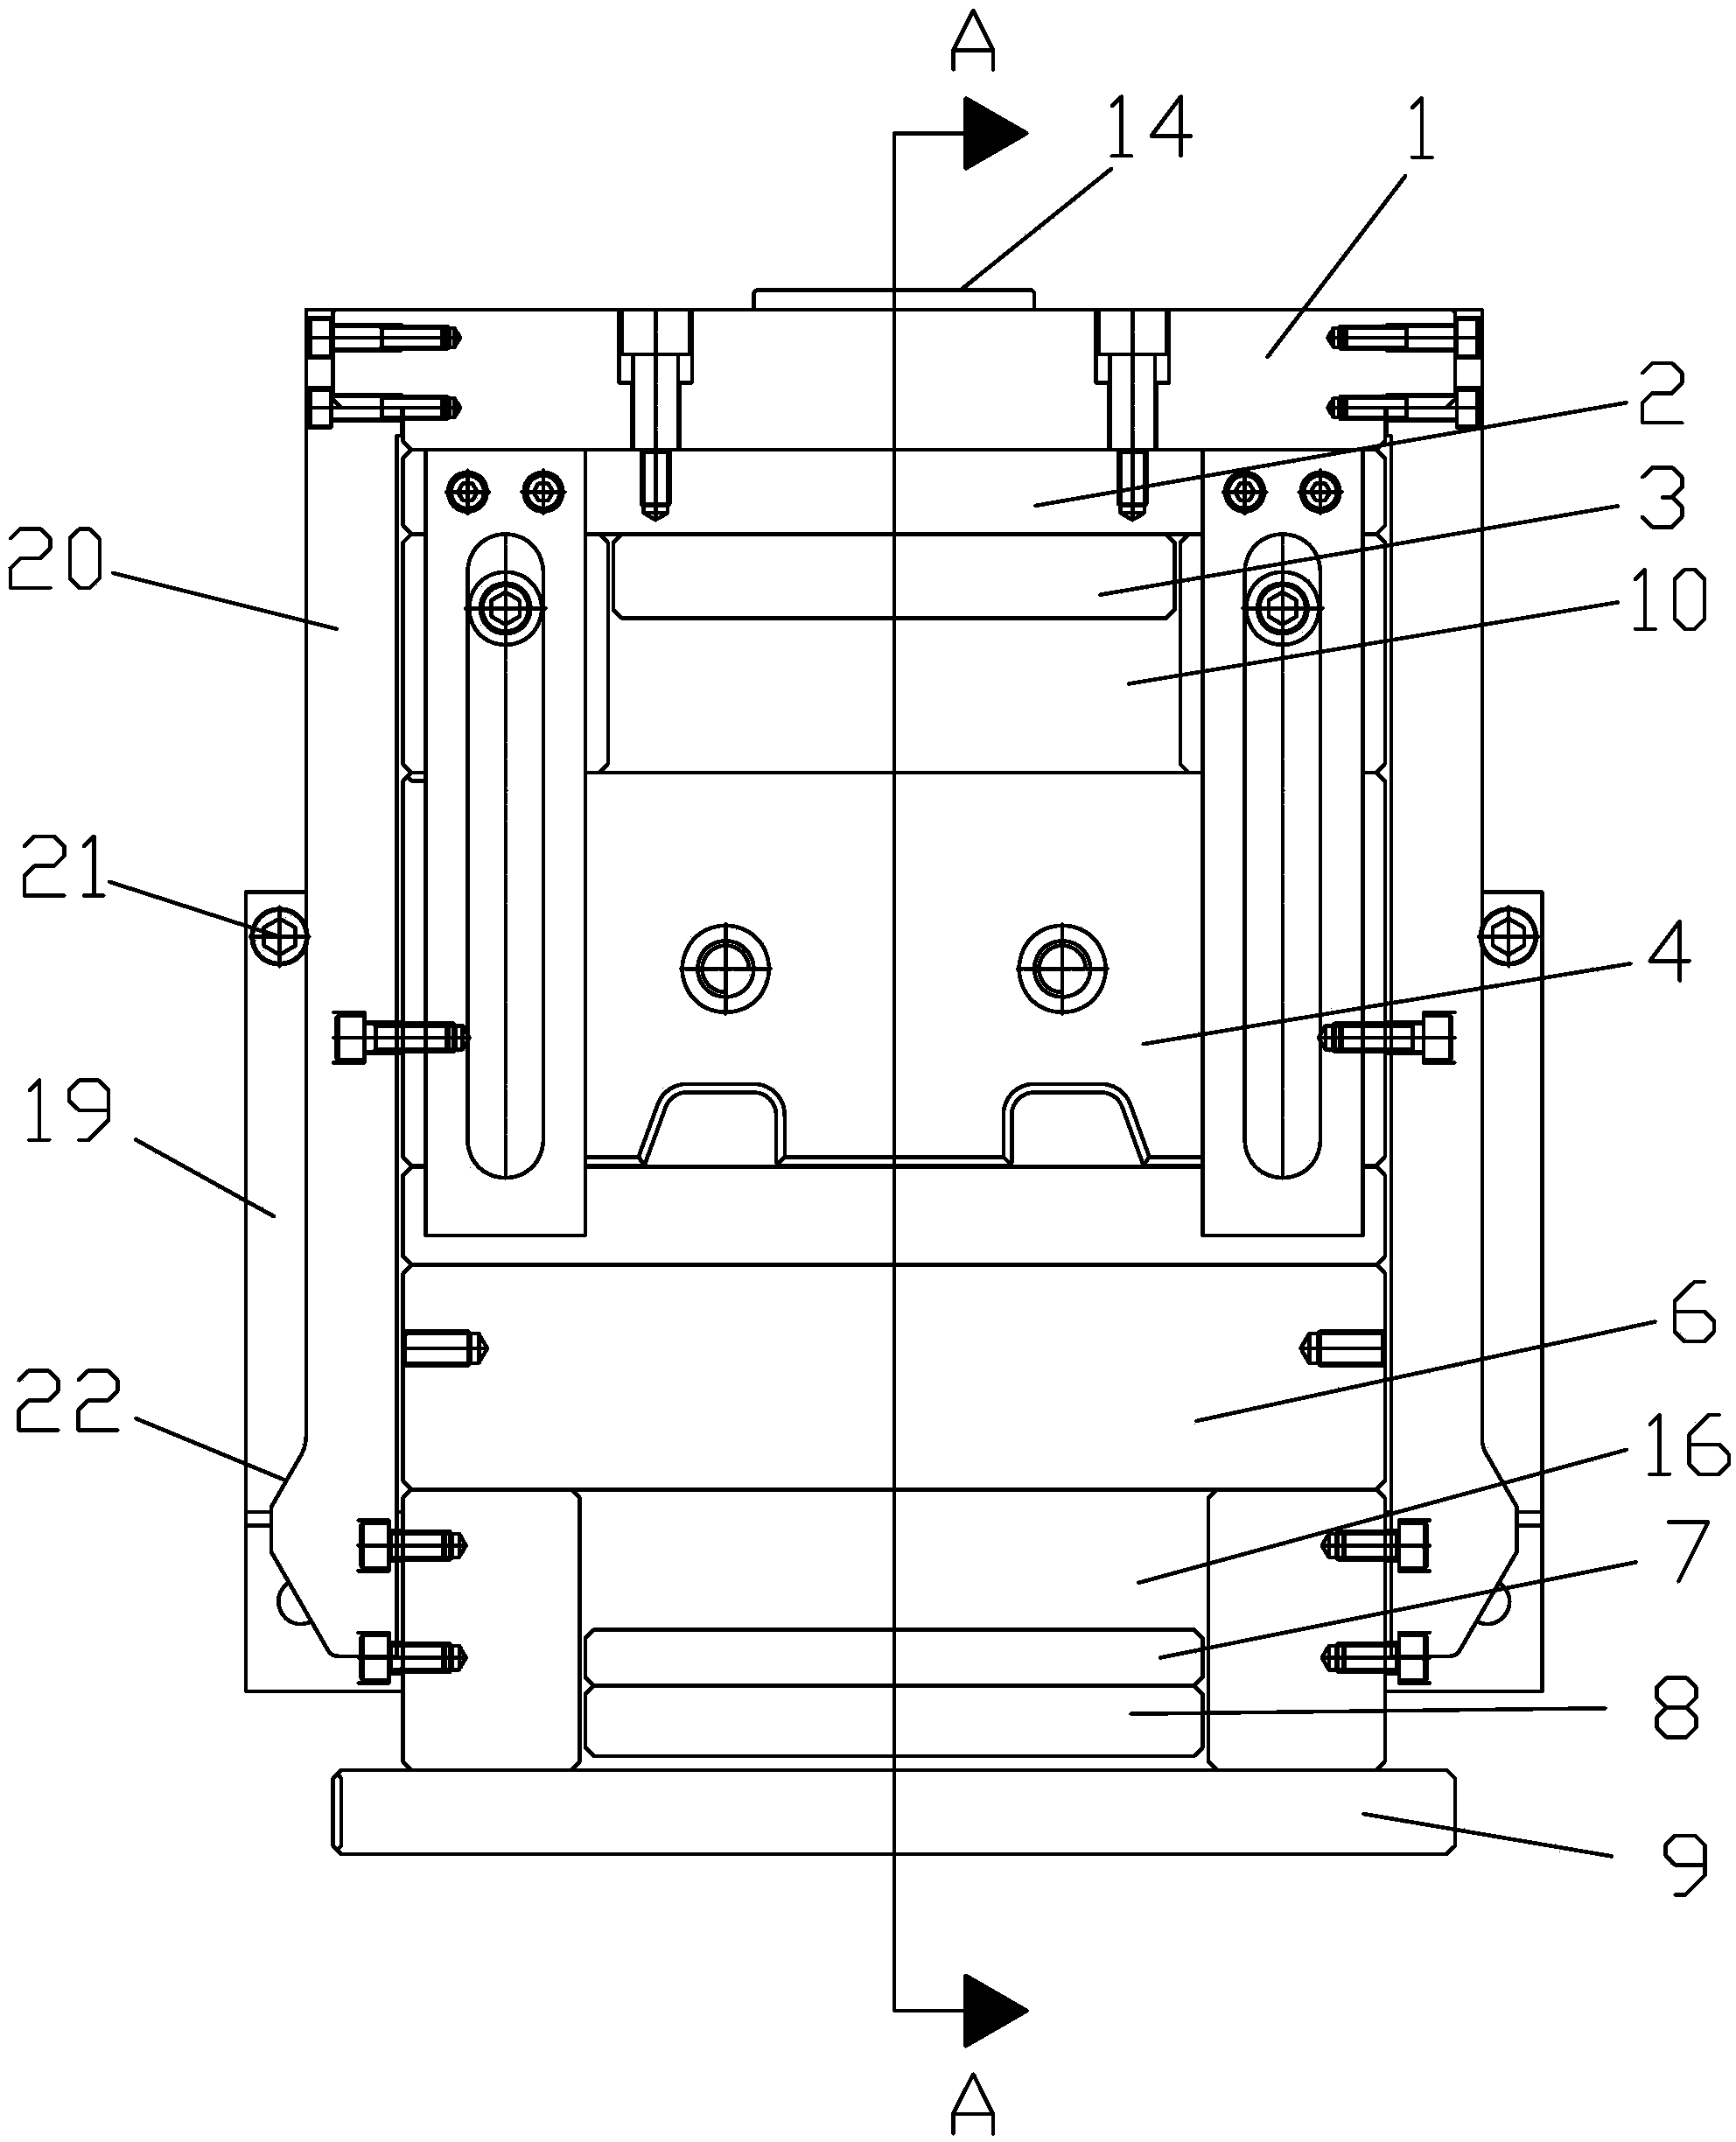 Mold for injection molding of parts with internal threads